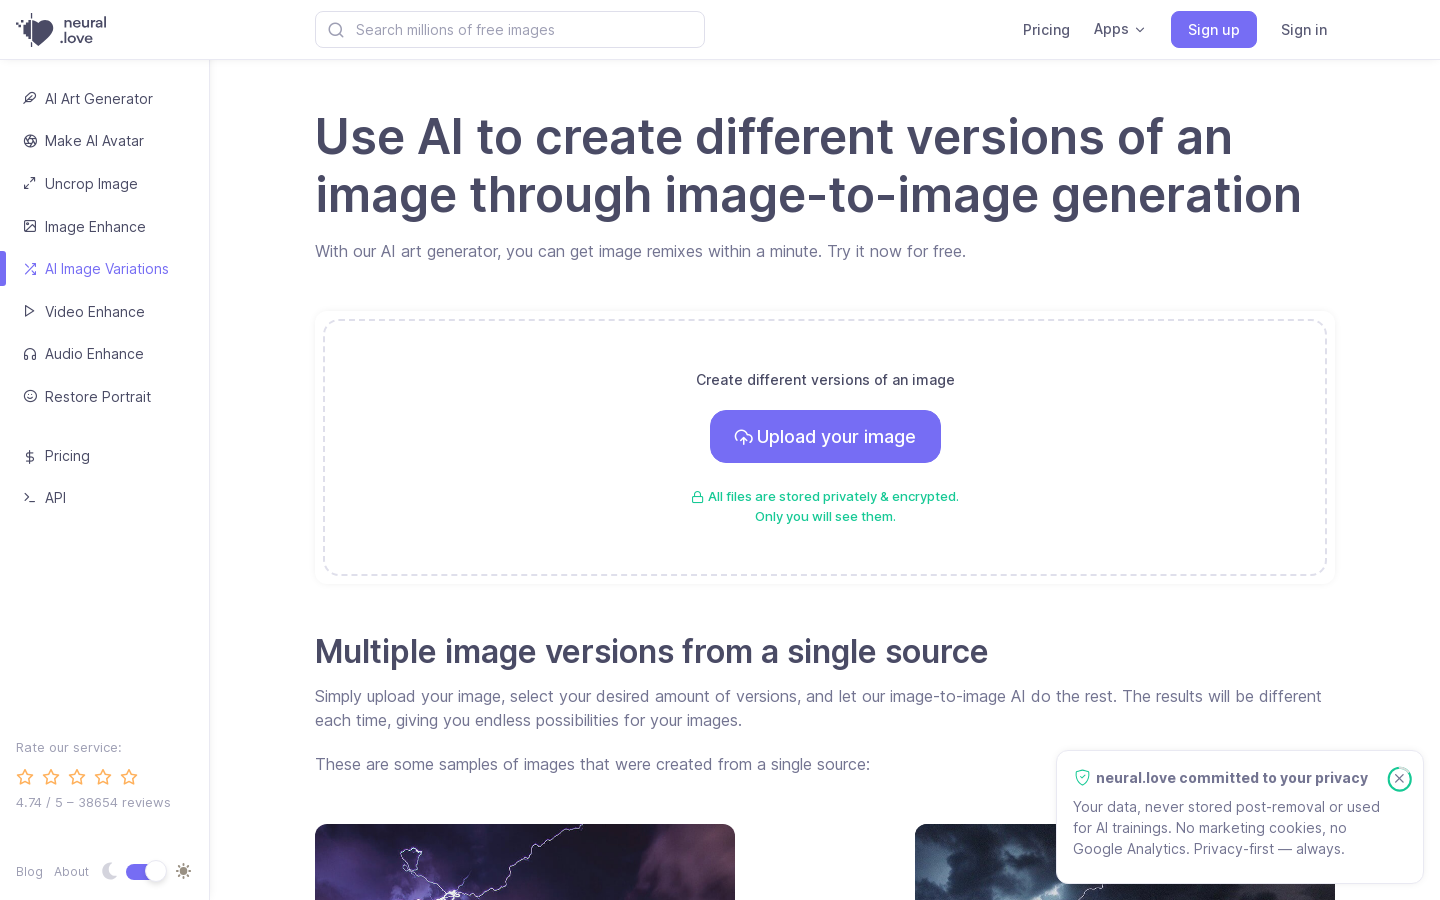 AI Image Variations by neural.love preview